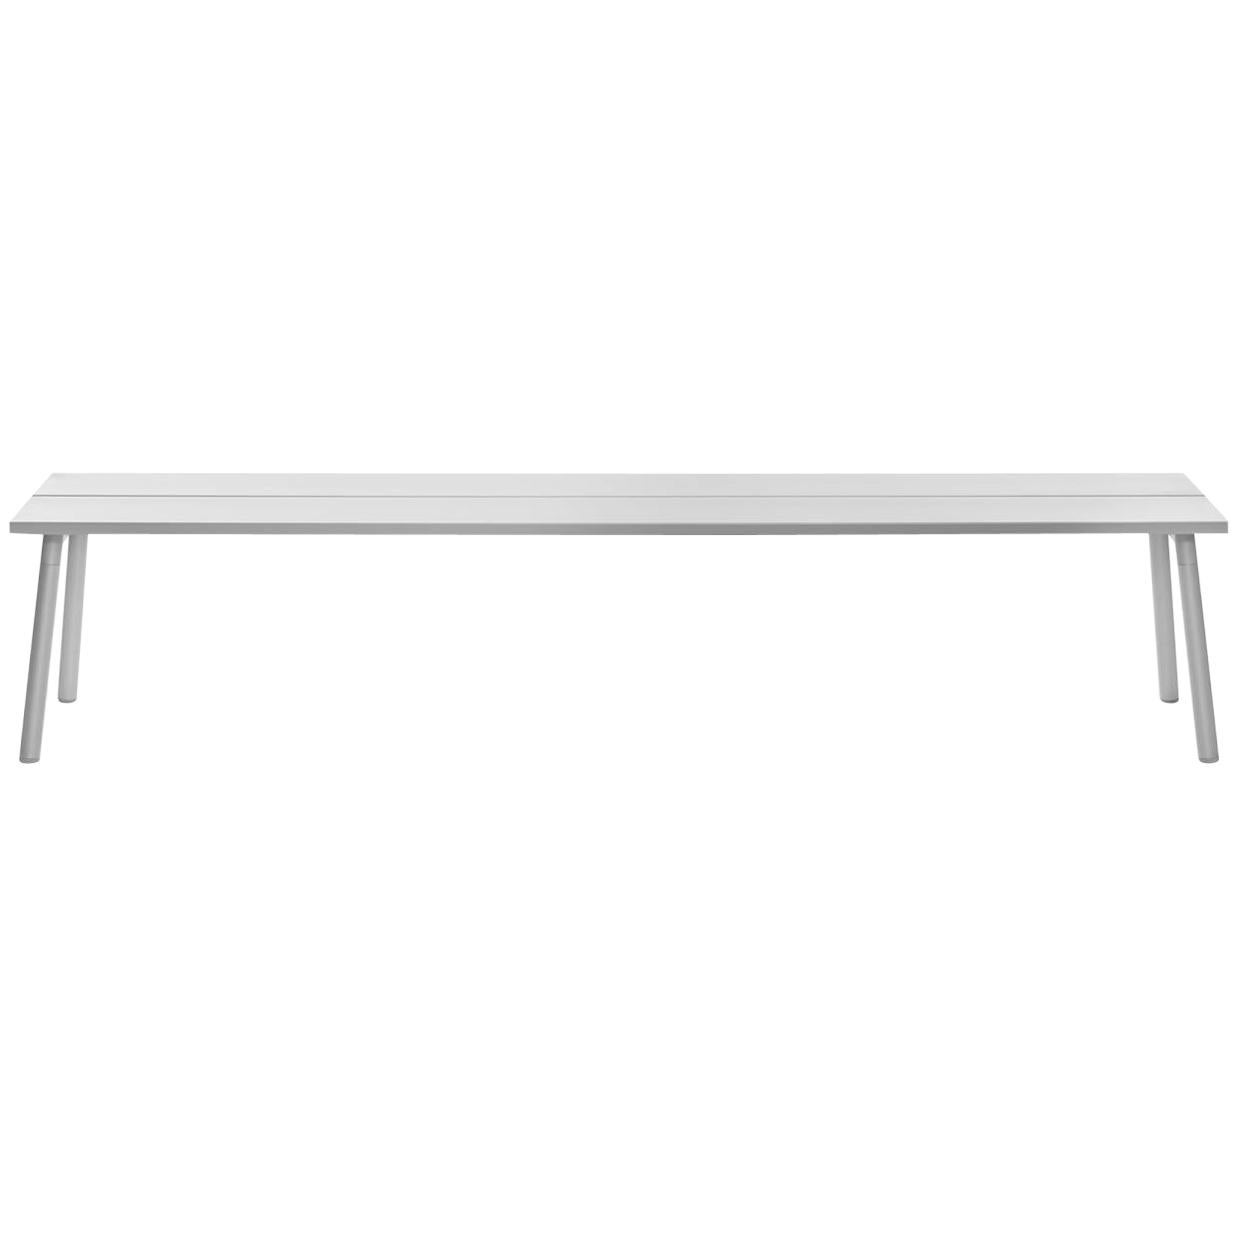 Emeco Run 4-Seat Bench in Clear Adonized Aluminum by Sam Hecht & Kim Colin For Sale